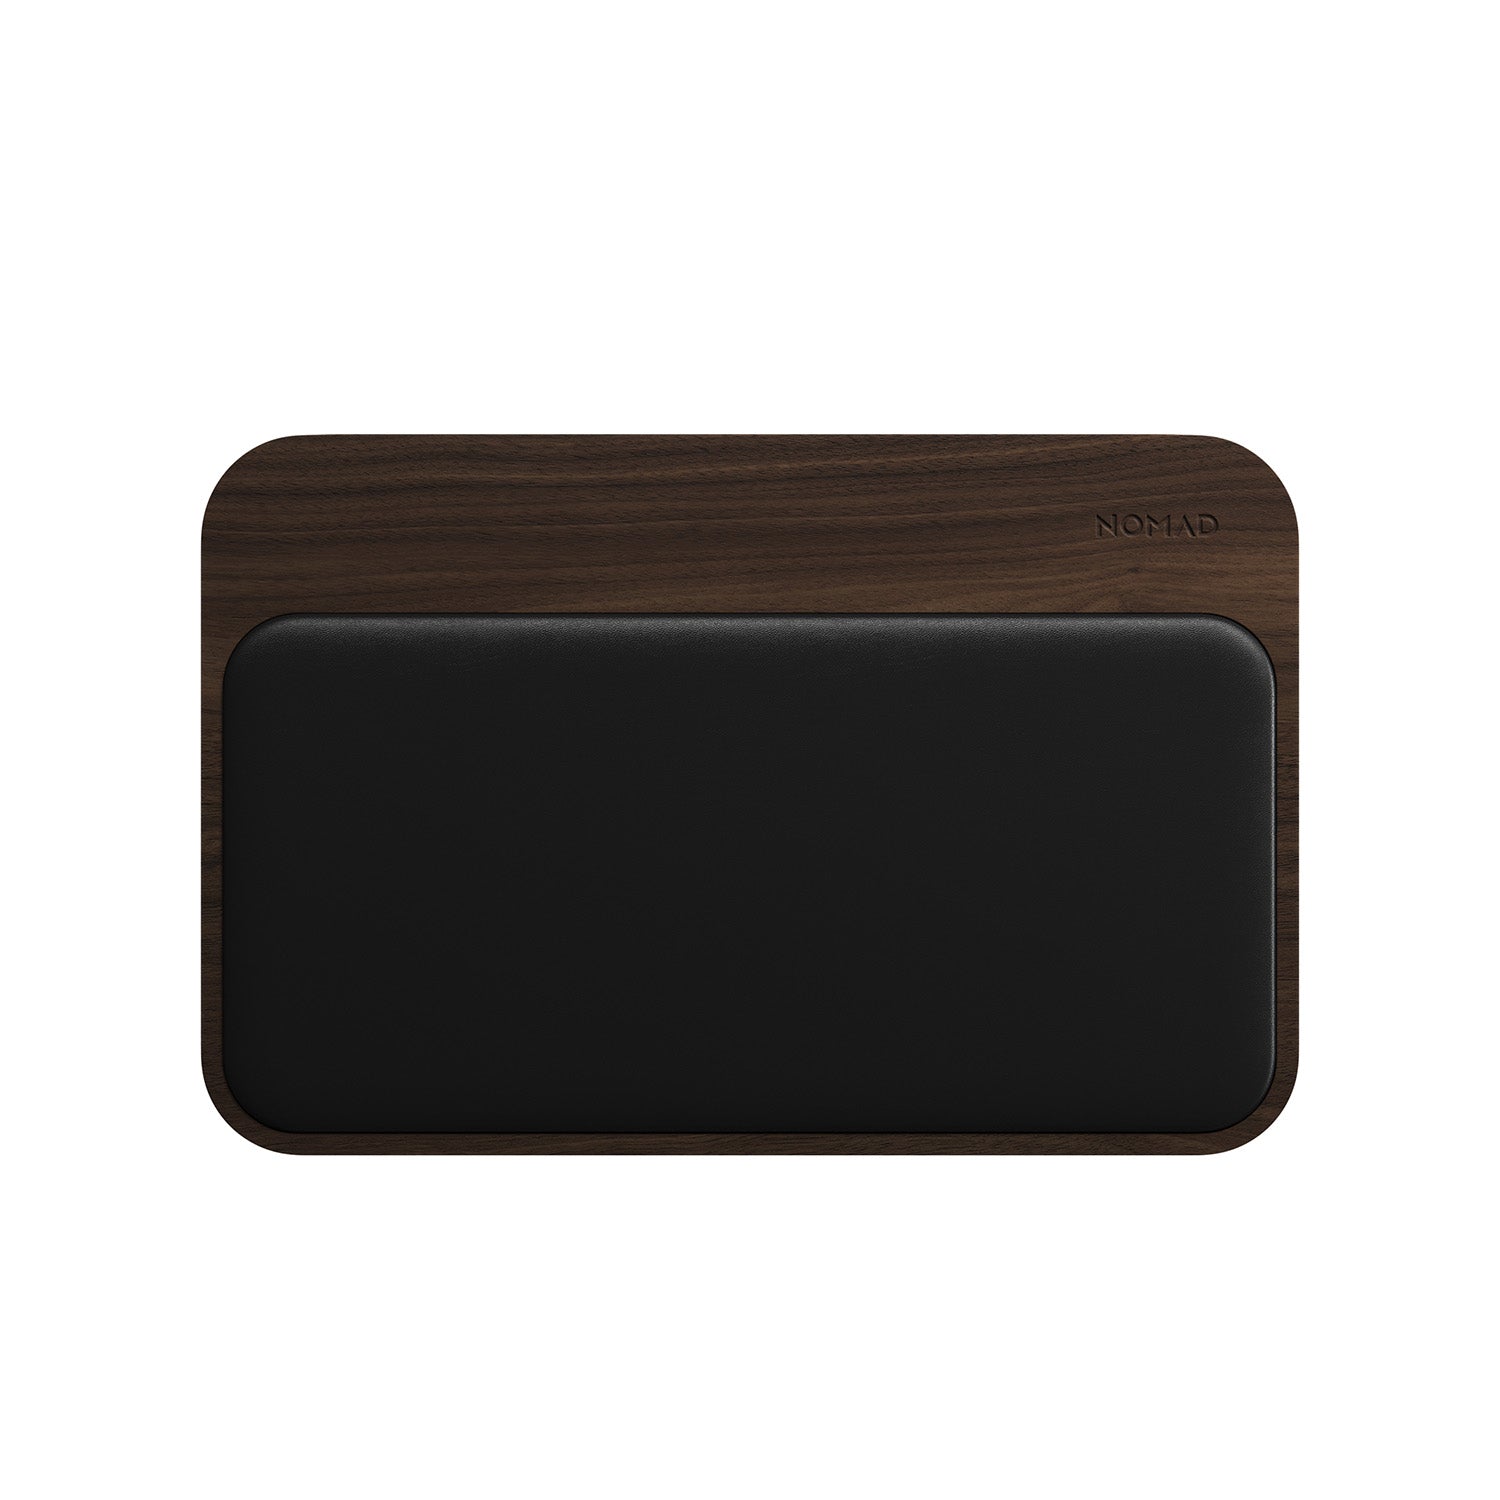 NOMAD Base Station Horween Leather Charging Pad Hub Edition with Mag Alignment Wireless Charging Pad NOMAD Walnut 